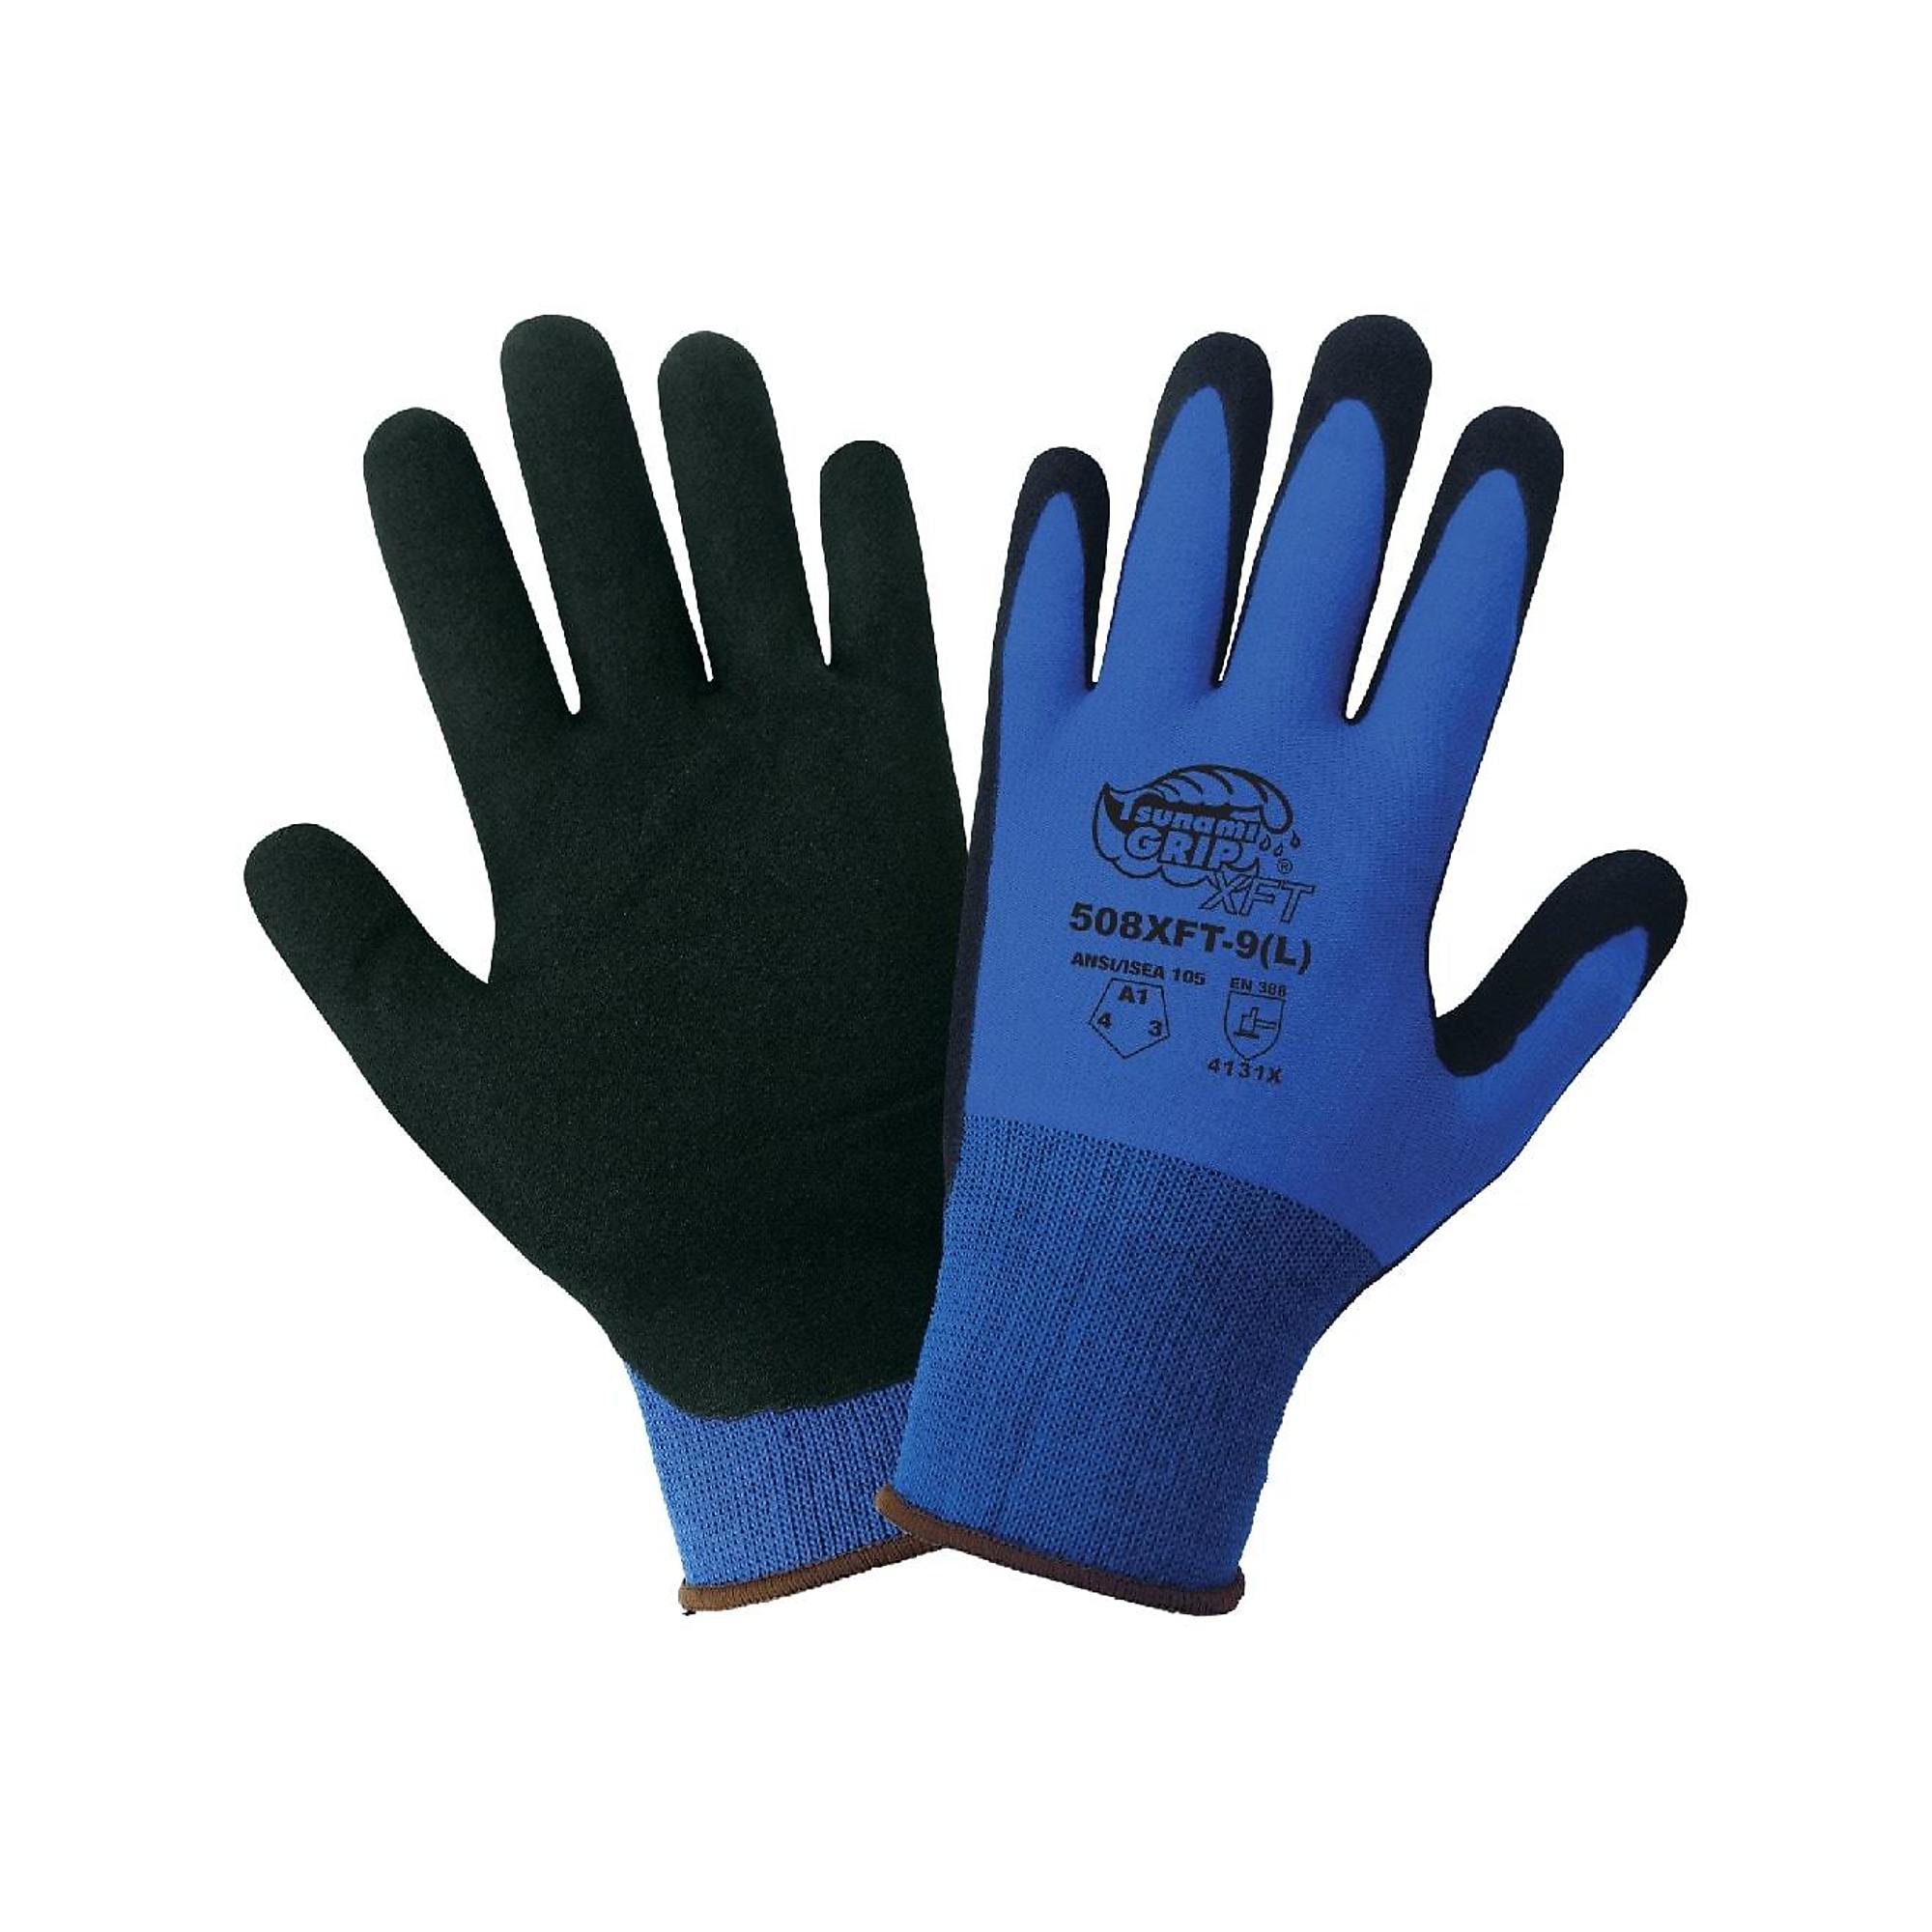 Global Glove Tsunami Grip , Blue, Black Foam Coated, Cut Resistant A1 Gloves - 12 Pairs, Size M, Color Blue/Black, Included (qty.) 12 Model 508XFT-8(M